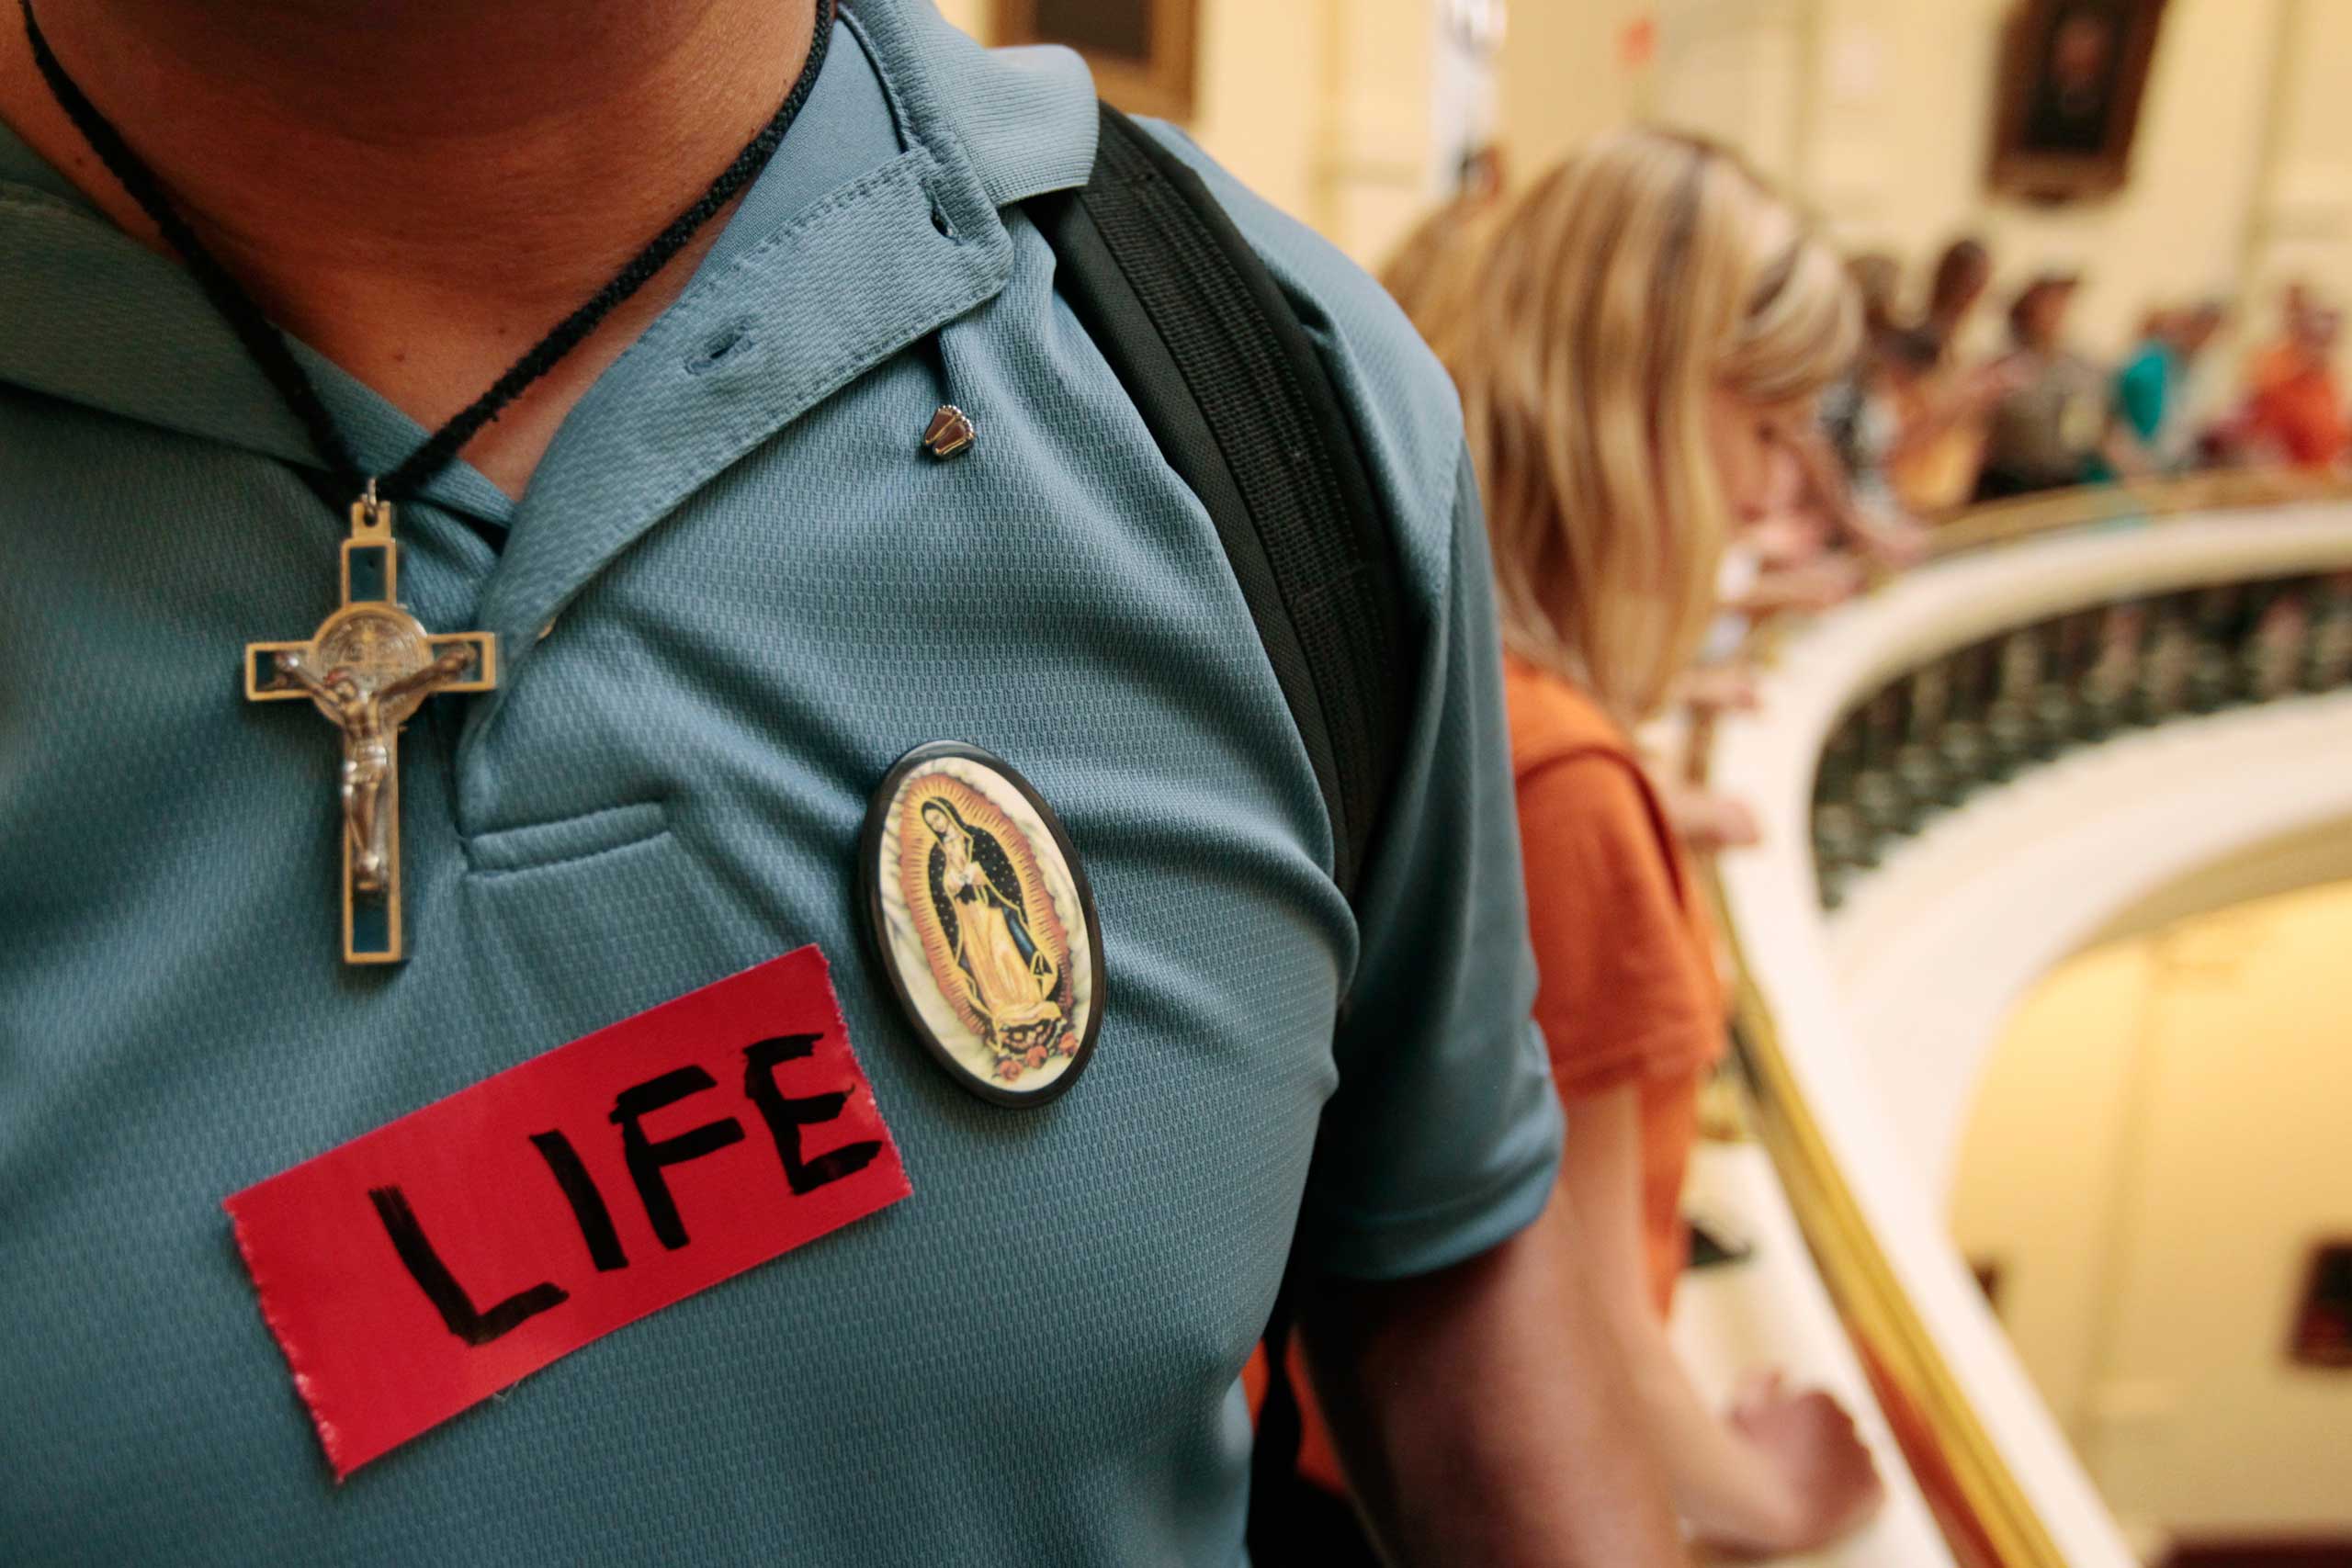 A pro-life supporter in the Texas State capitol in Austin, Texas in 2013. (Erich Schlegel—Getty Images)